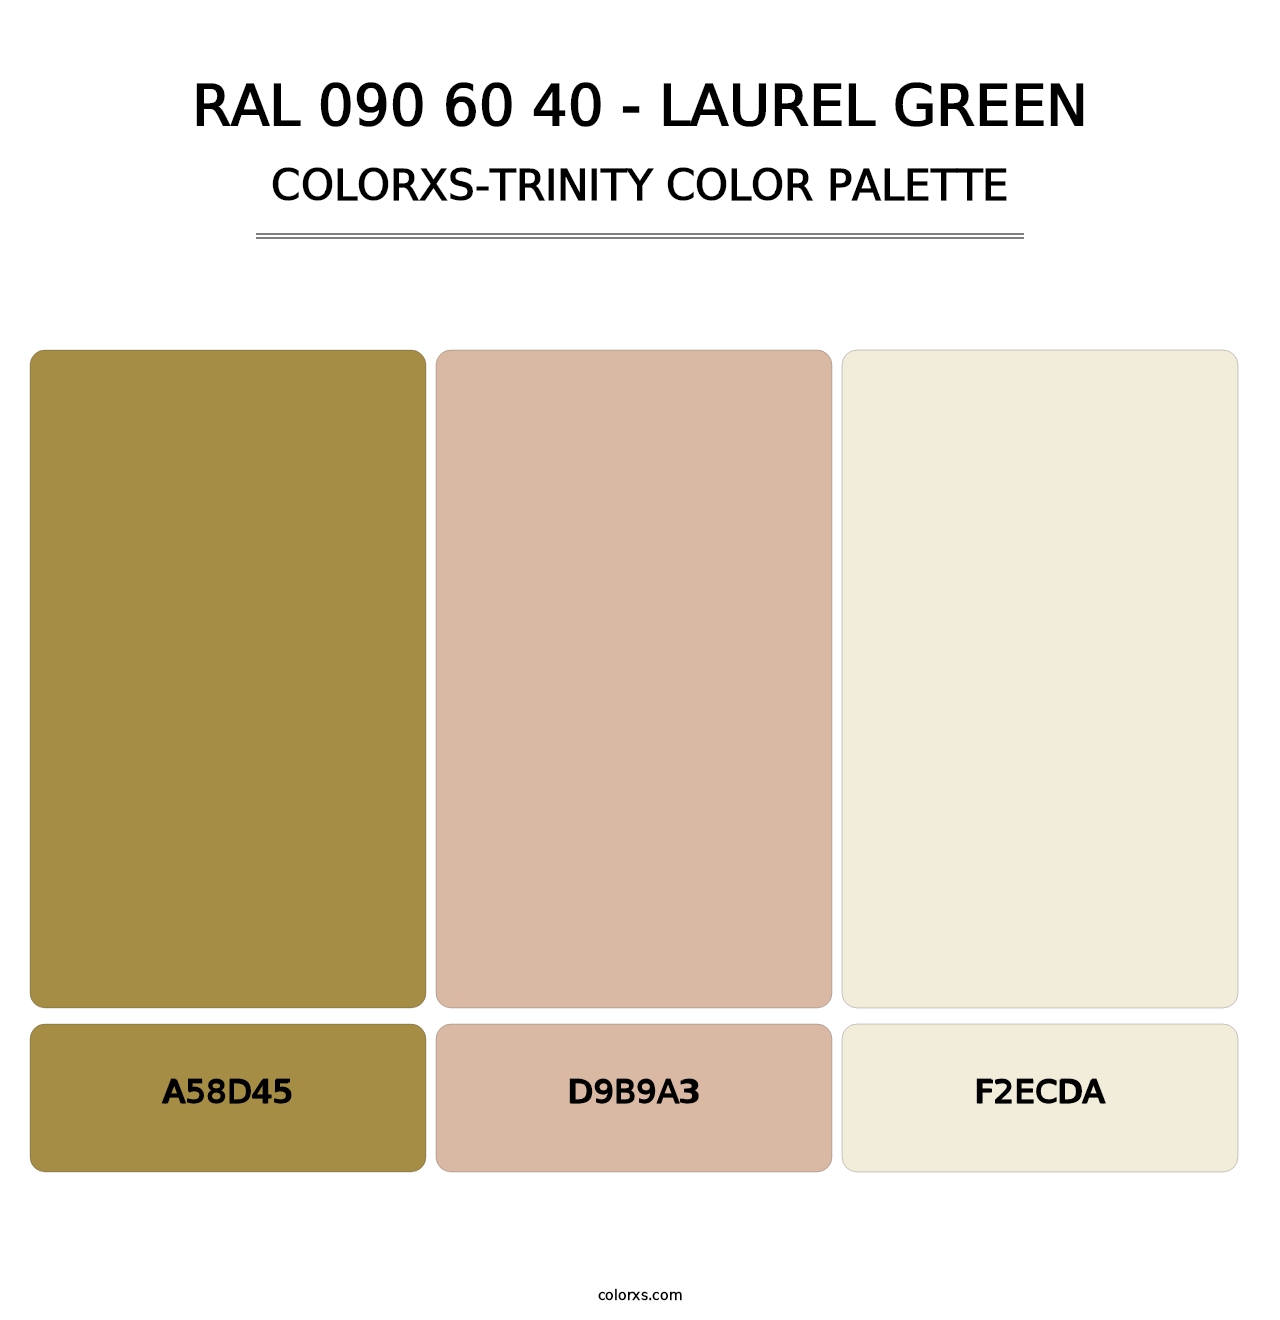 RAL 090 60 40 - Laurel Green - Colorxs Trinity Palette